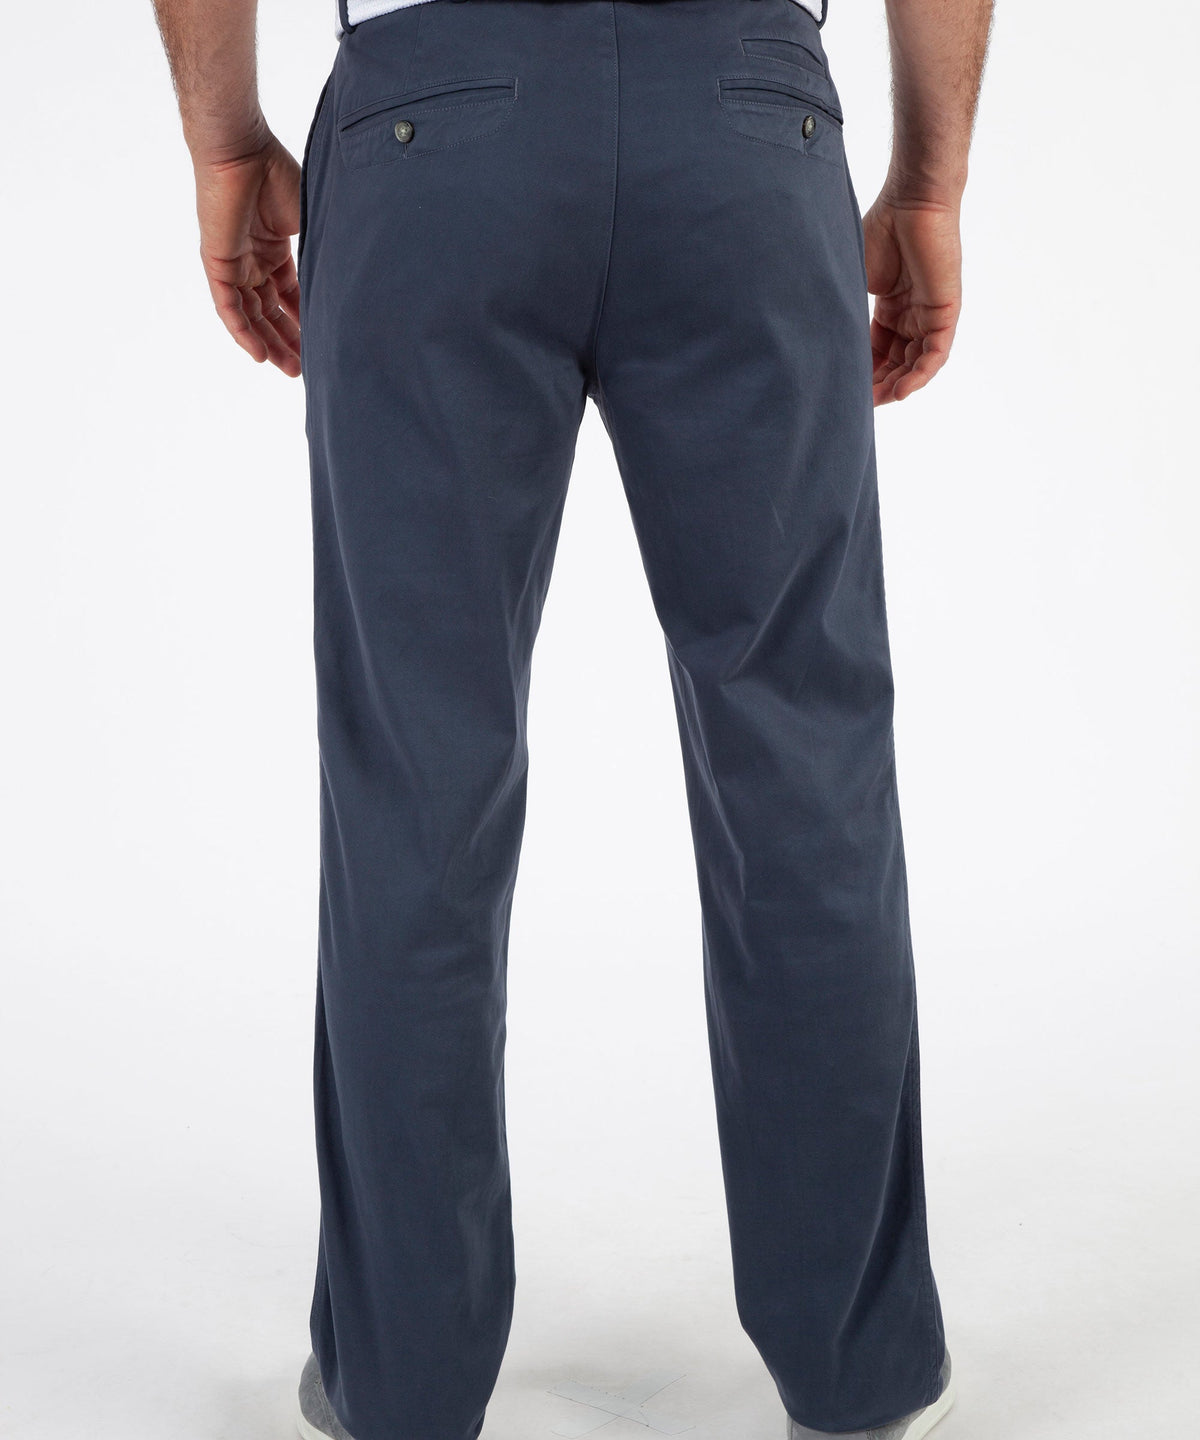 Luxe Blend Chino Pants